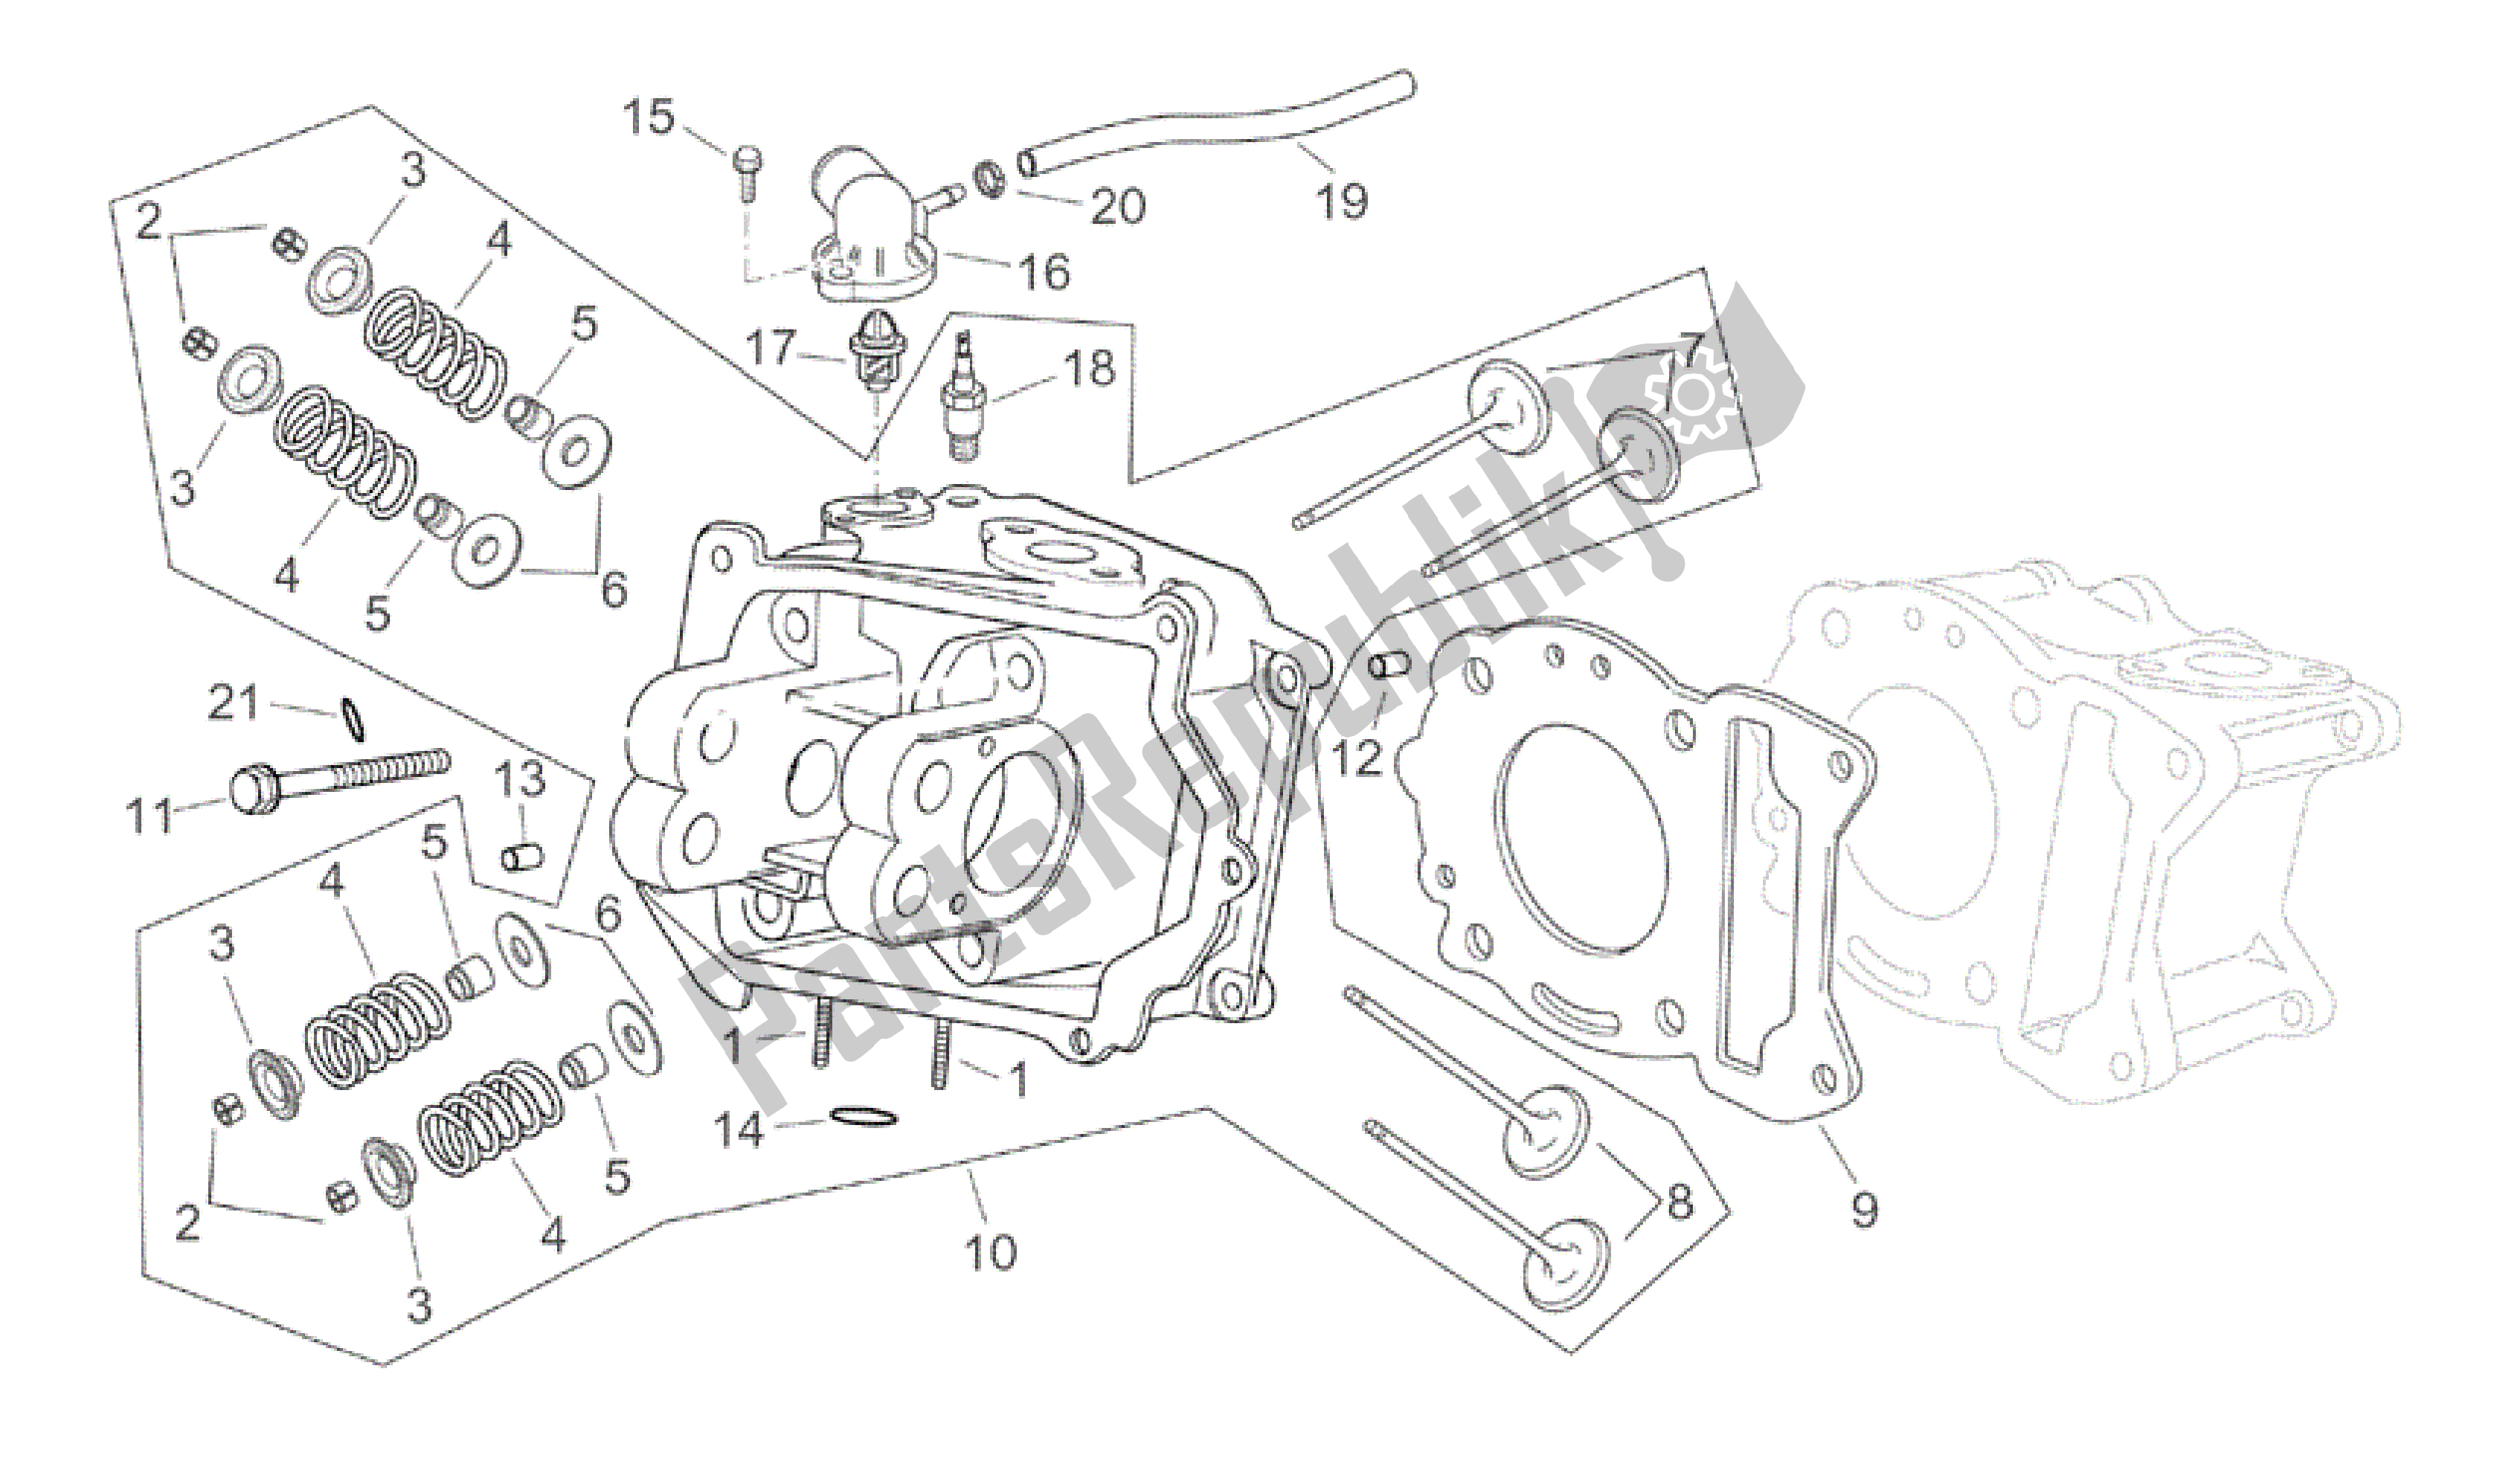 All parts for the Cylinder Head of the Aprilia Atlantic 125 2003 - 2006